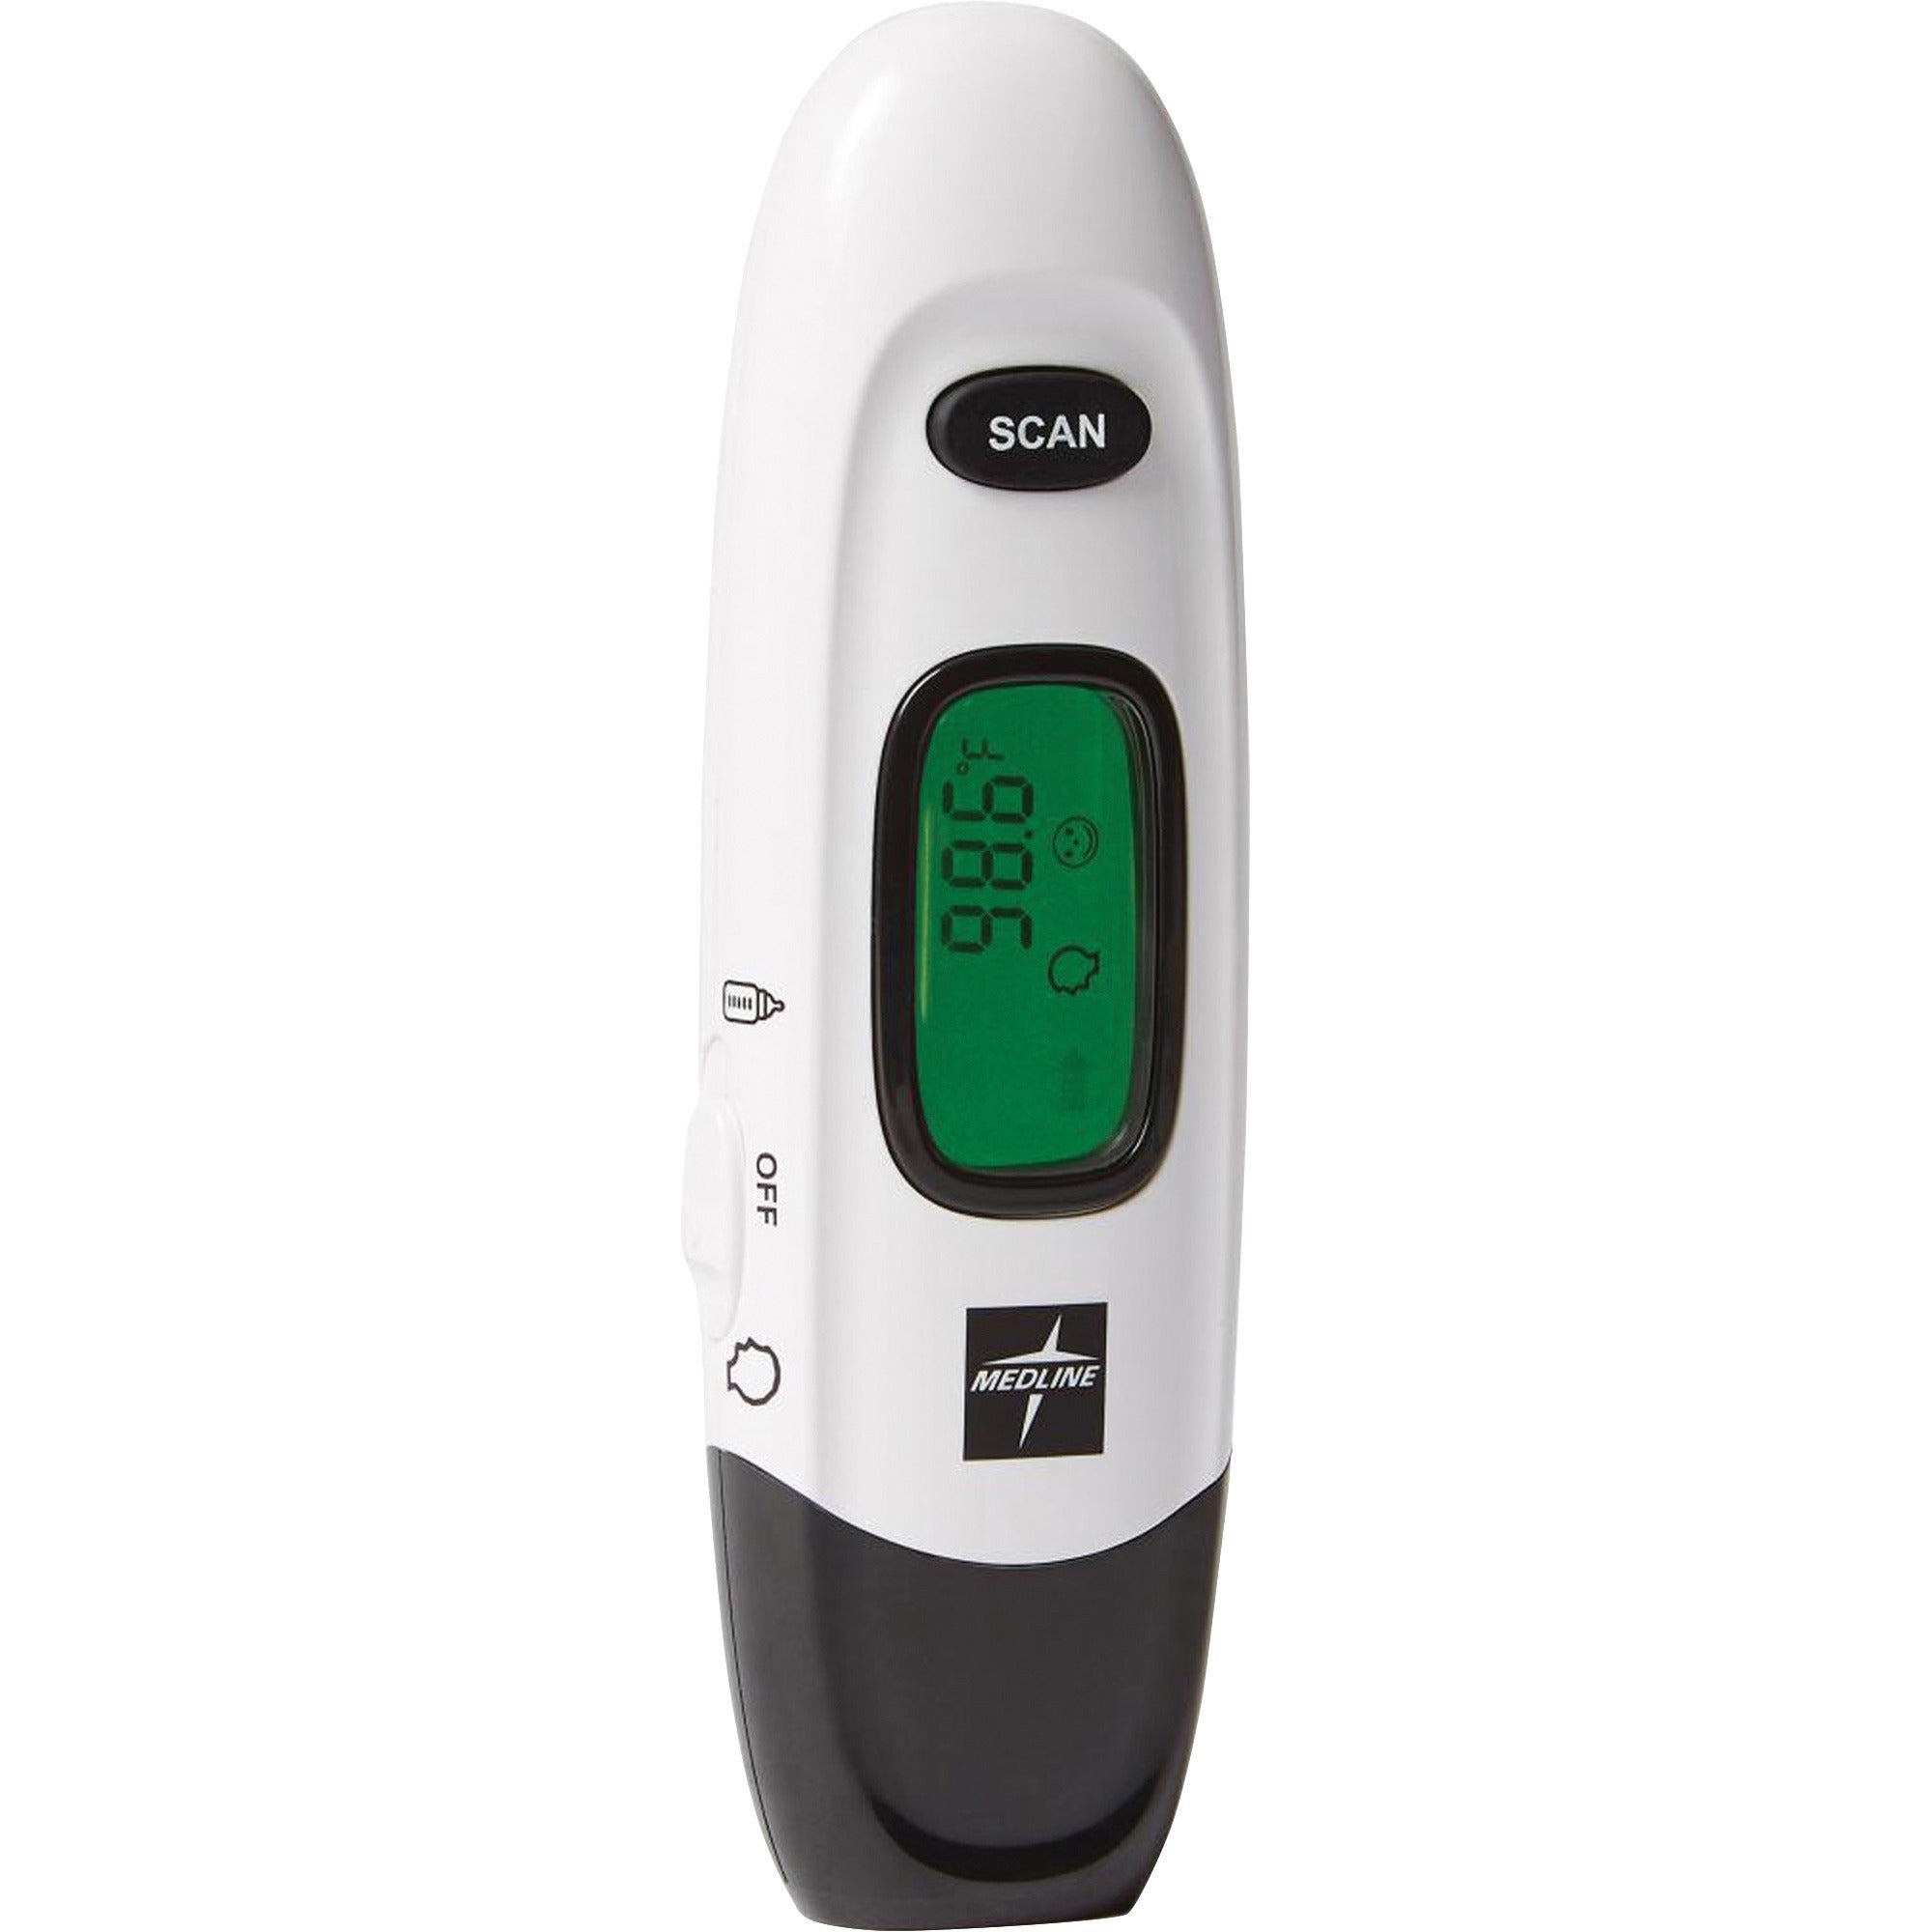 medline-no-touch-forehead-thermometer-reusable-dual-dial-infrared-for-home-forehead-clinical-white_miimdsnotouch - 1